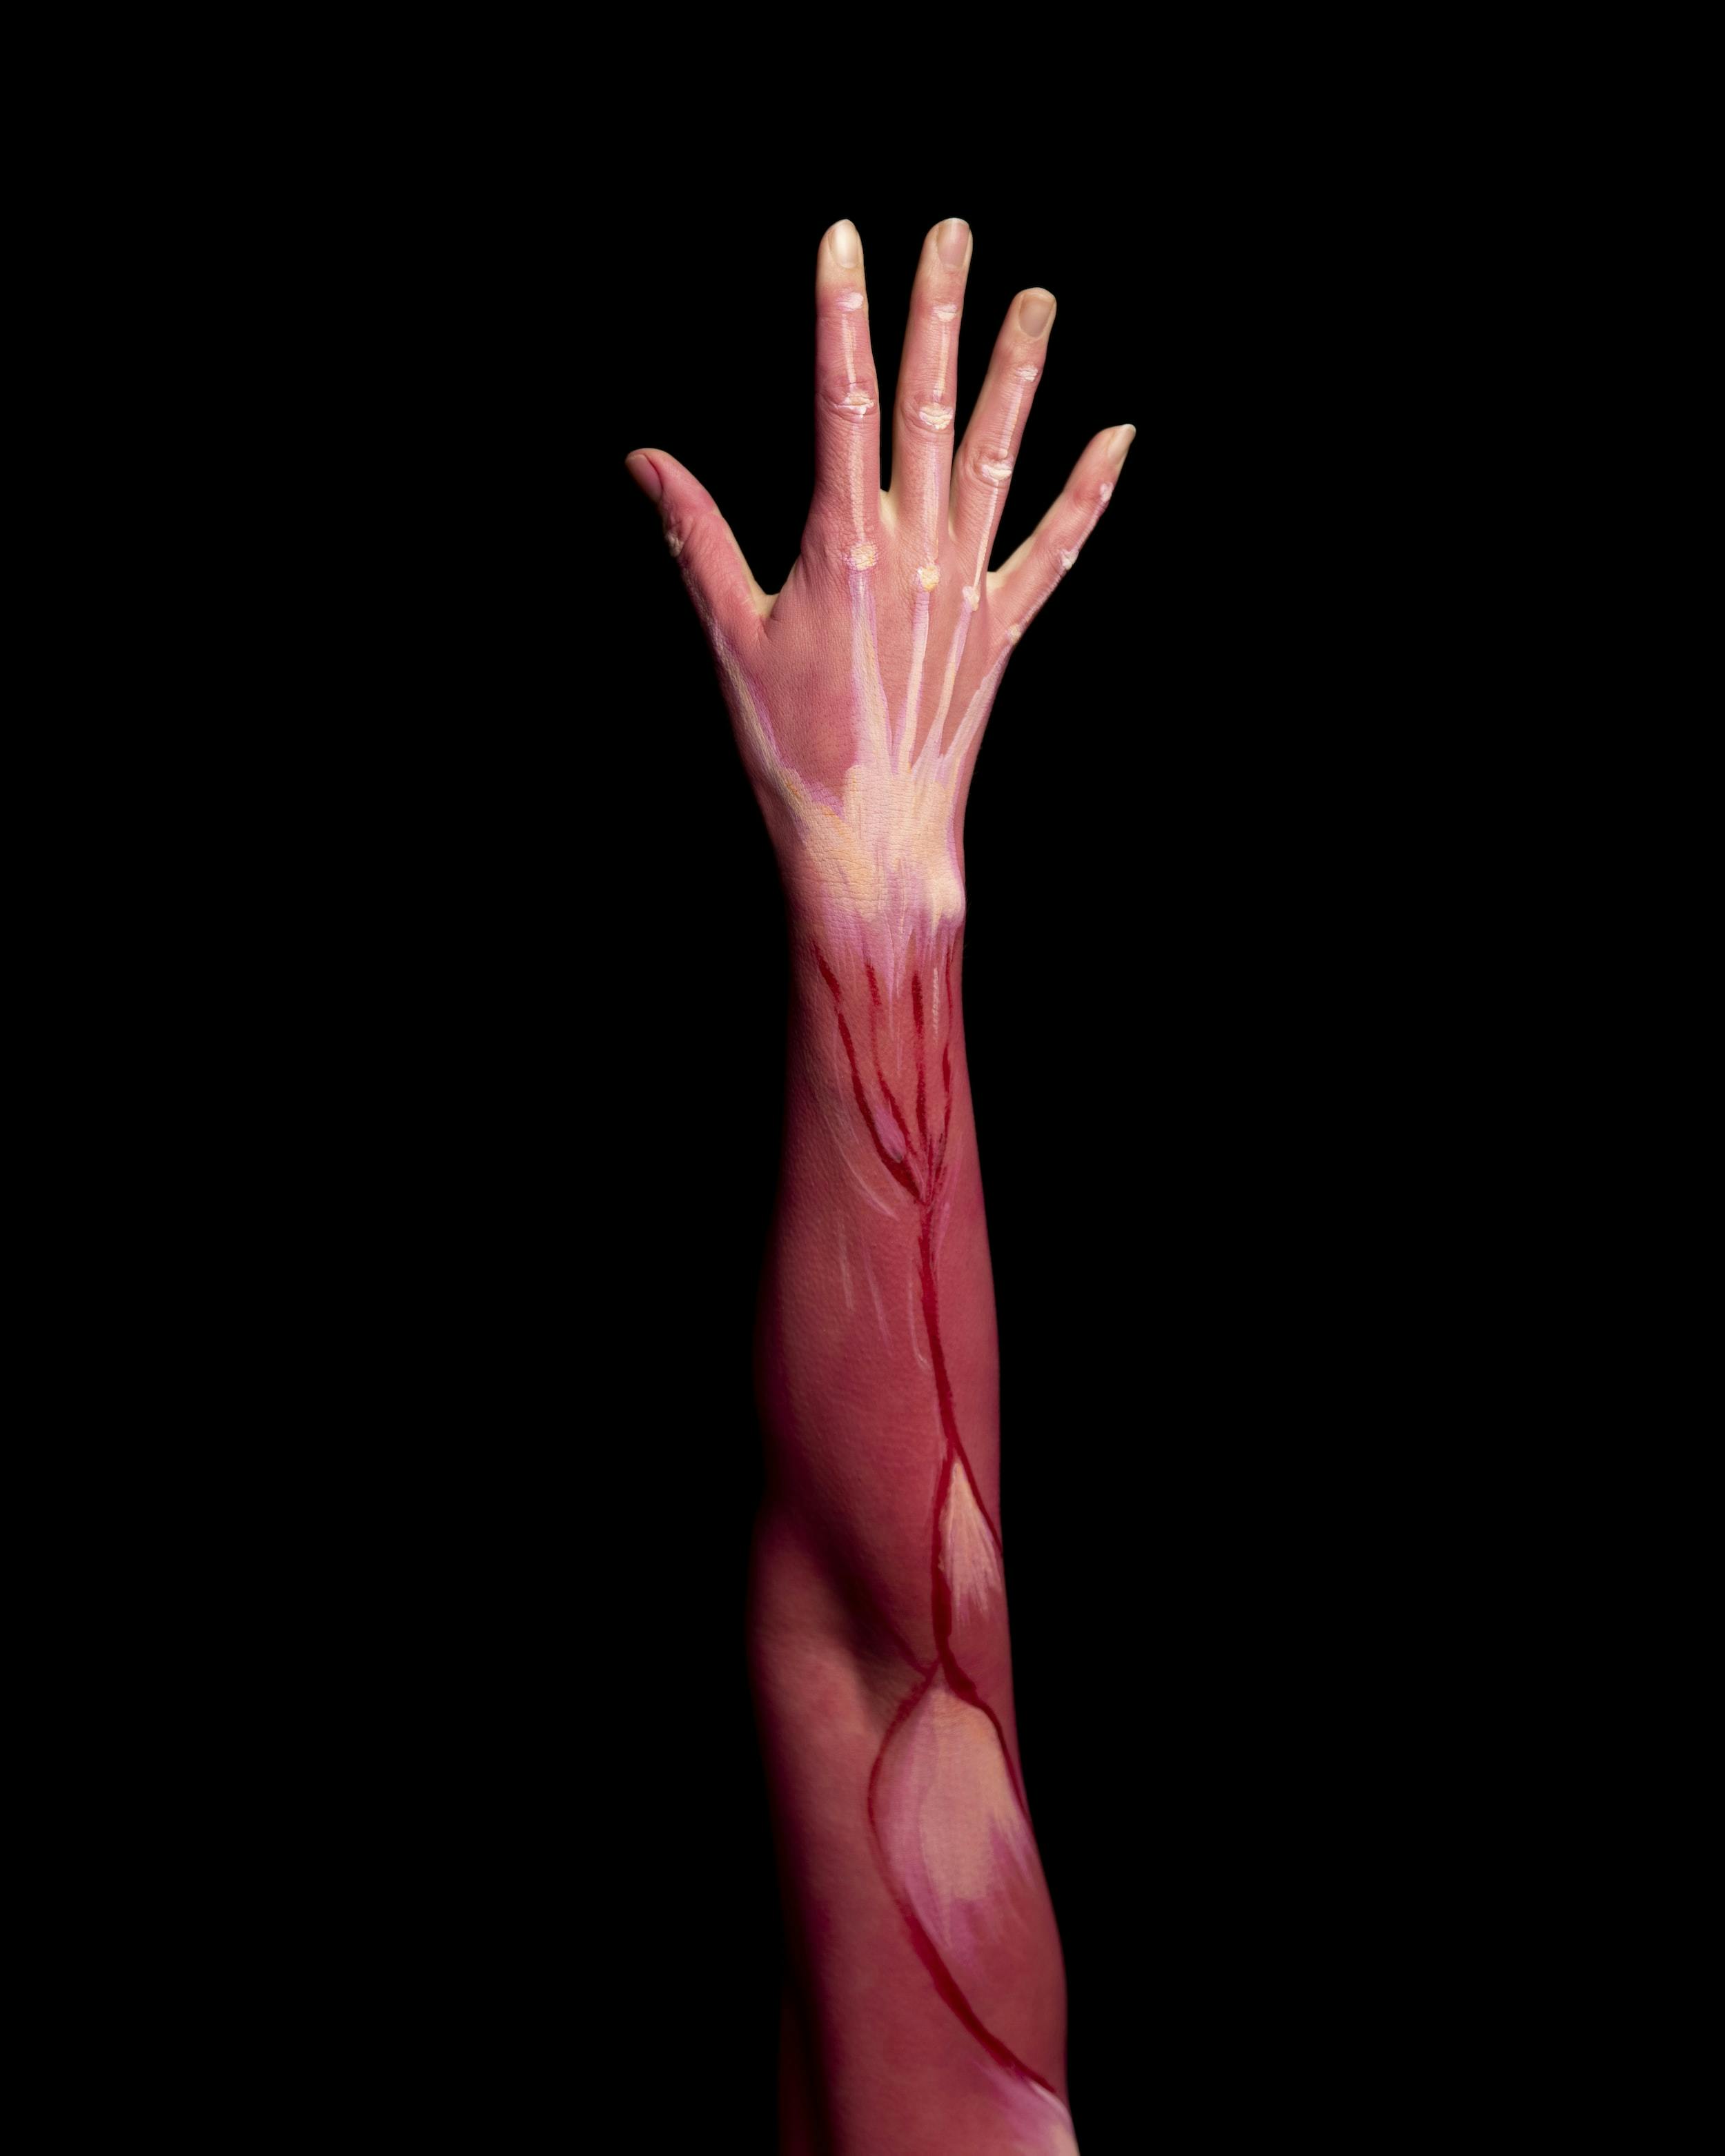 Elongated right arm on black background, with muscle bundles in evidence.